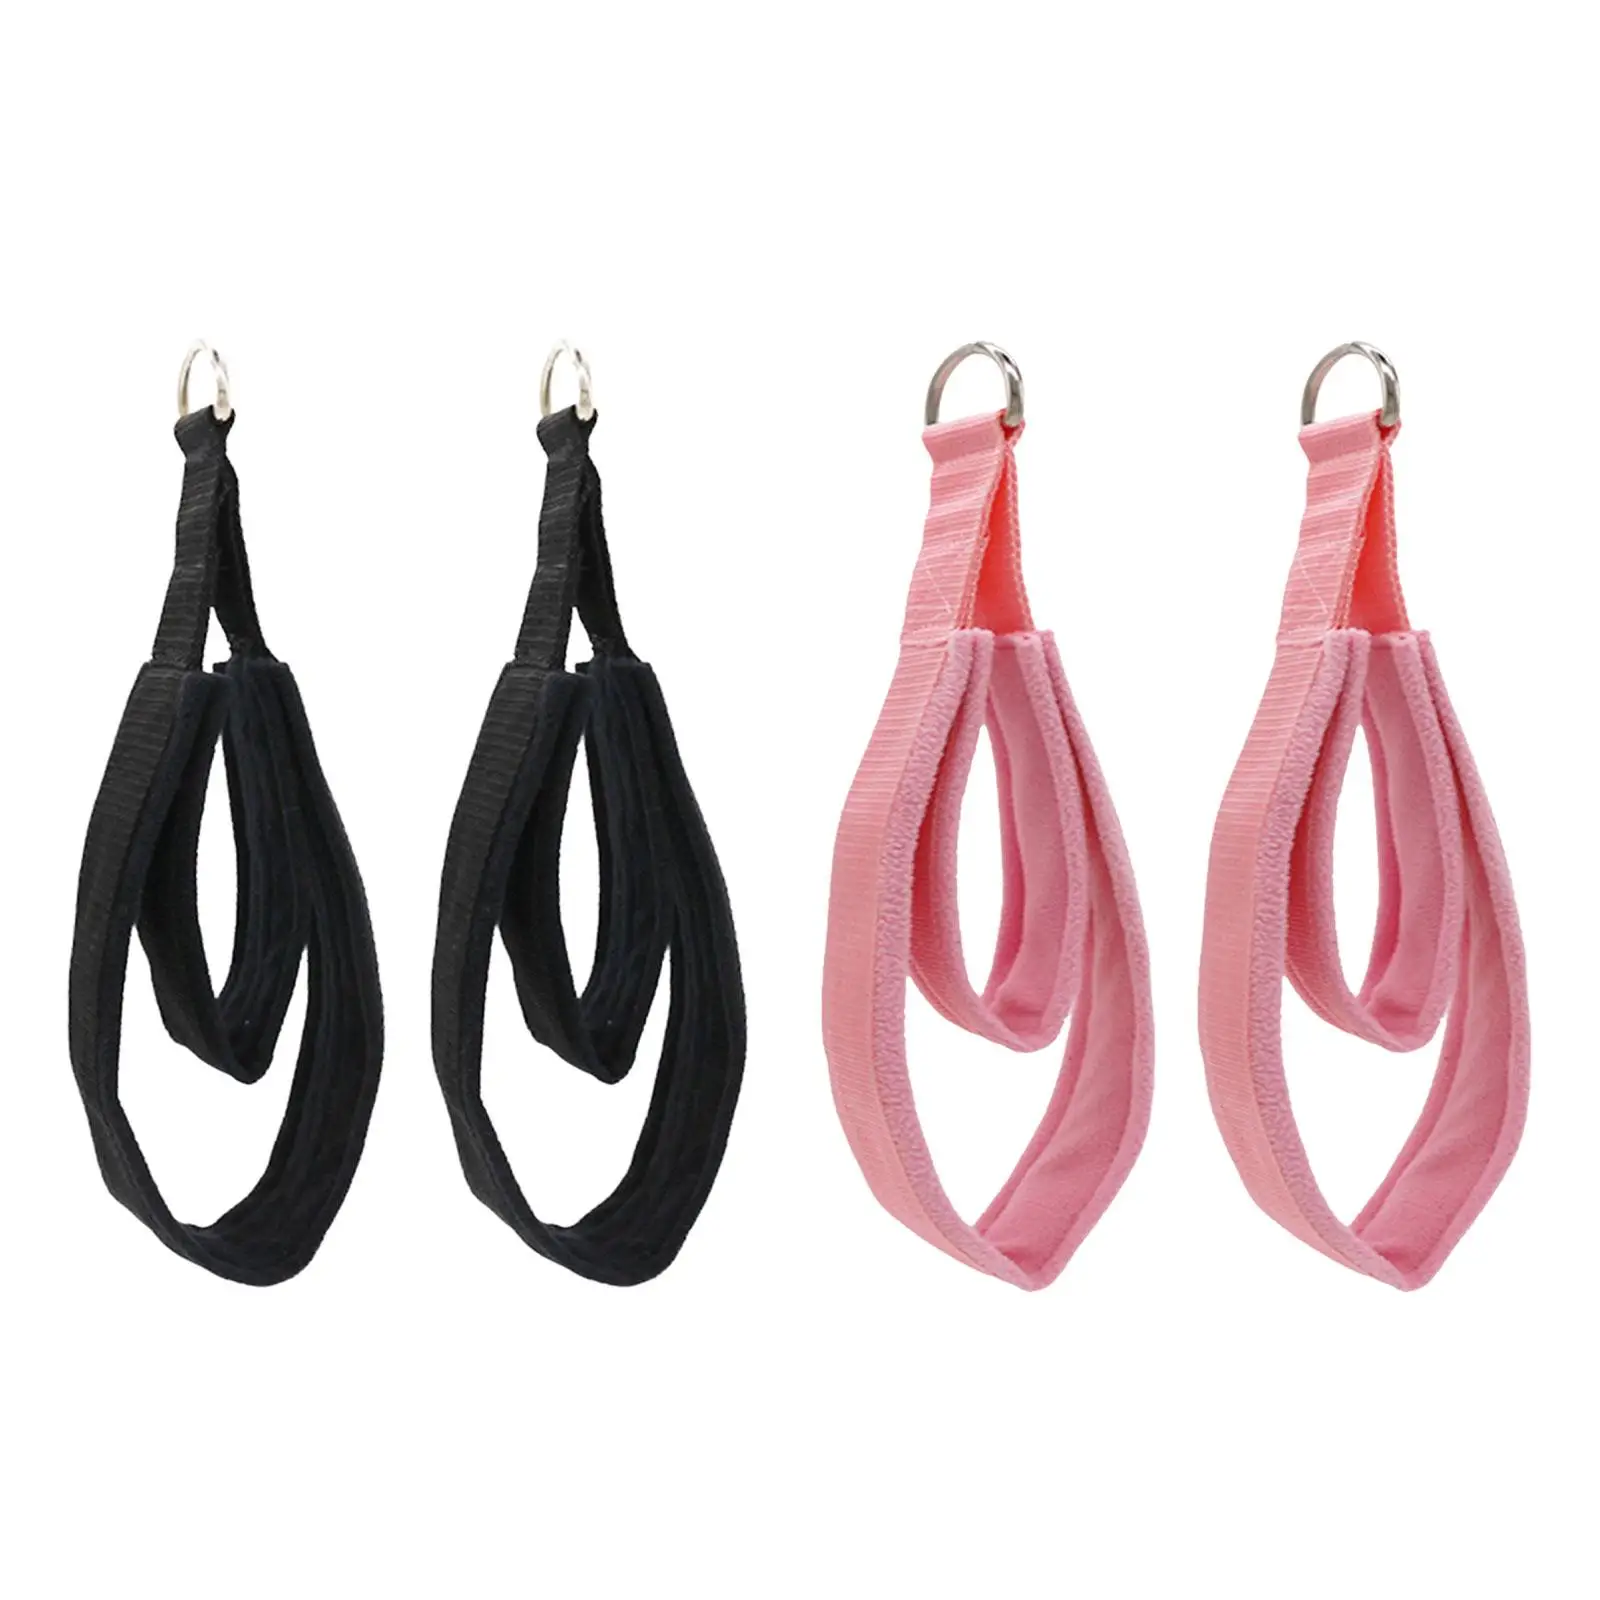 2x D Rings Straps Stretch Exercise Band Pilates Double Loop Straps Pilates Straps for Reformer Home Gym Gymnastics Women Men